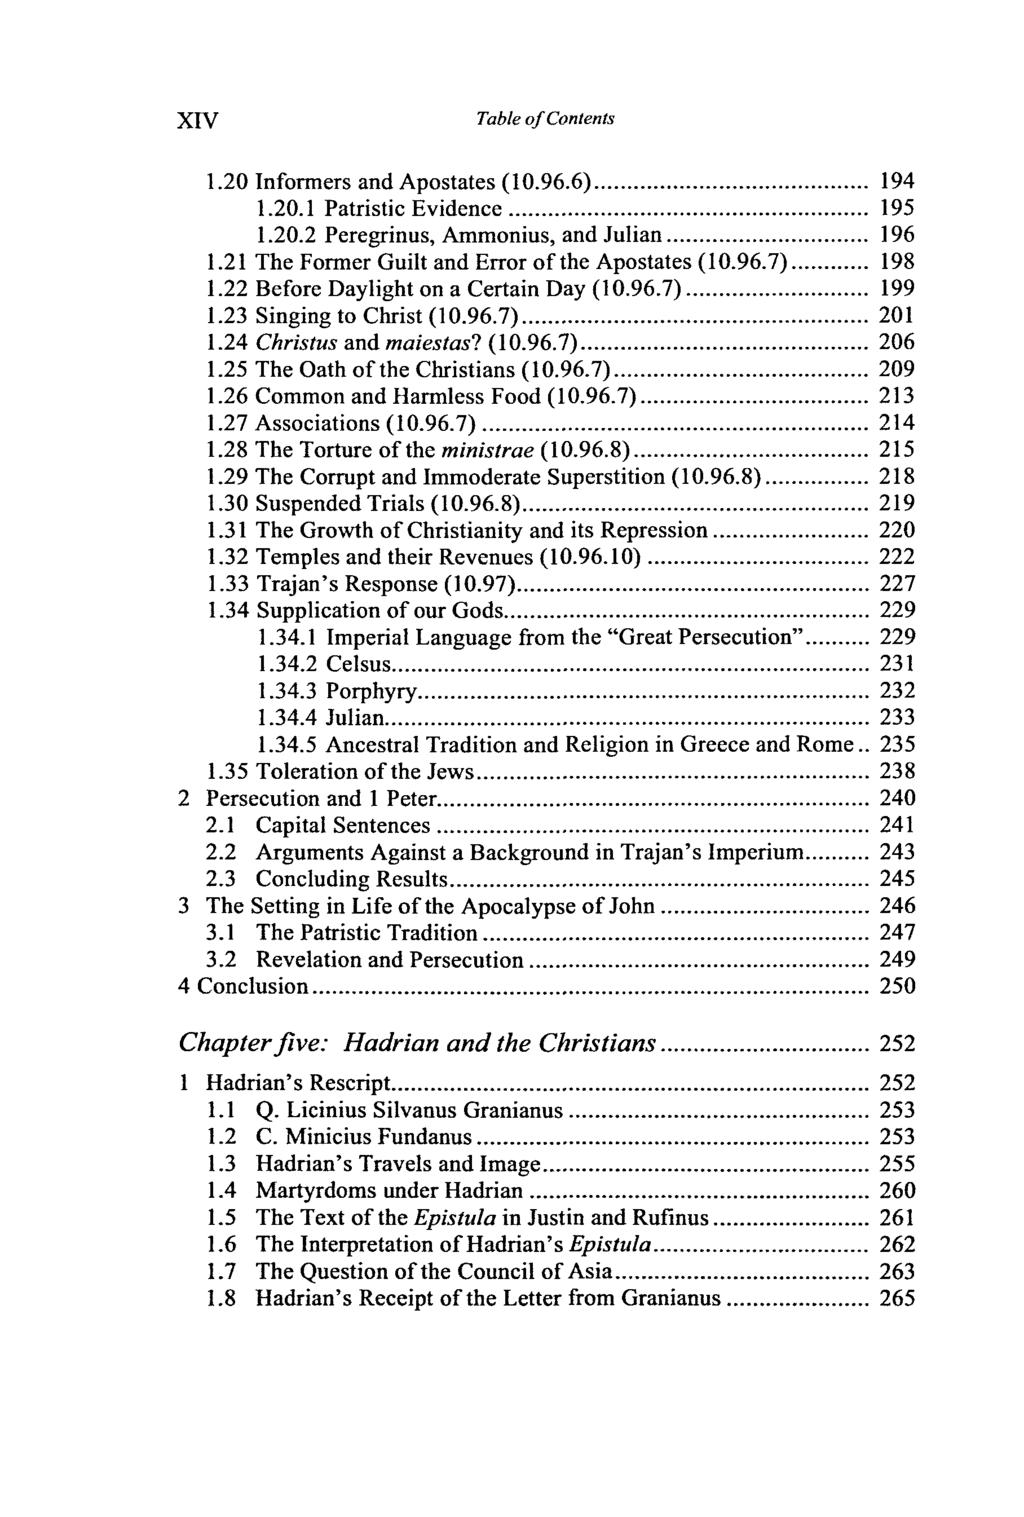 XIV Table of Contents 1.20 Informers and Apostates (10.96.6) 194 1.20.1 Patristic Evidence 195 1.20.2 Peregrinus, Ammonius, and Julian 196 1.21 The Former Guilt and Error of the Apostates (10.96.7) 198 1.